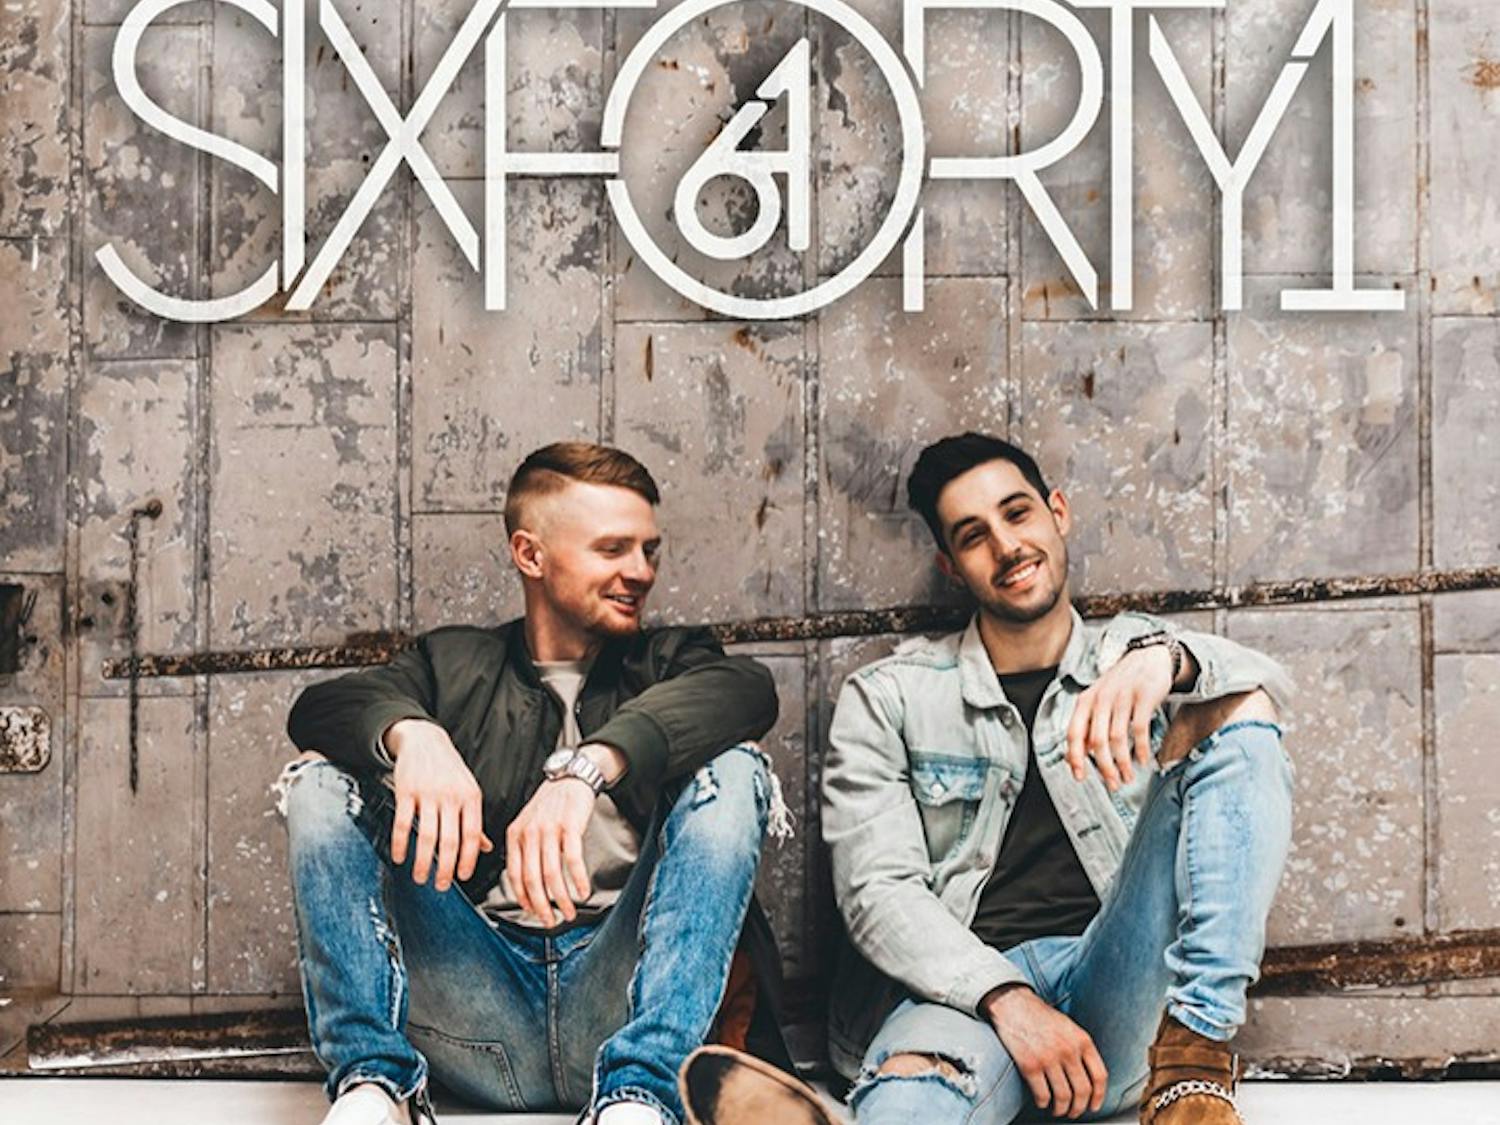 Austin Gee and Brooks Hoffman make up the new country music duo named SixForty1. The band will be hosting a free concert at The Senate this Saturday, Oct. 17.